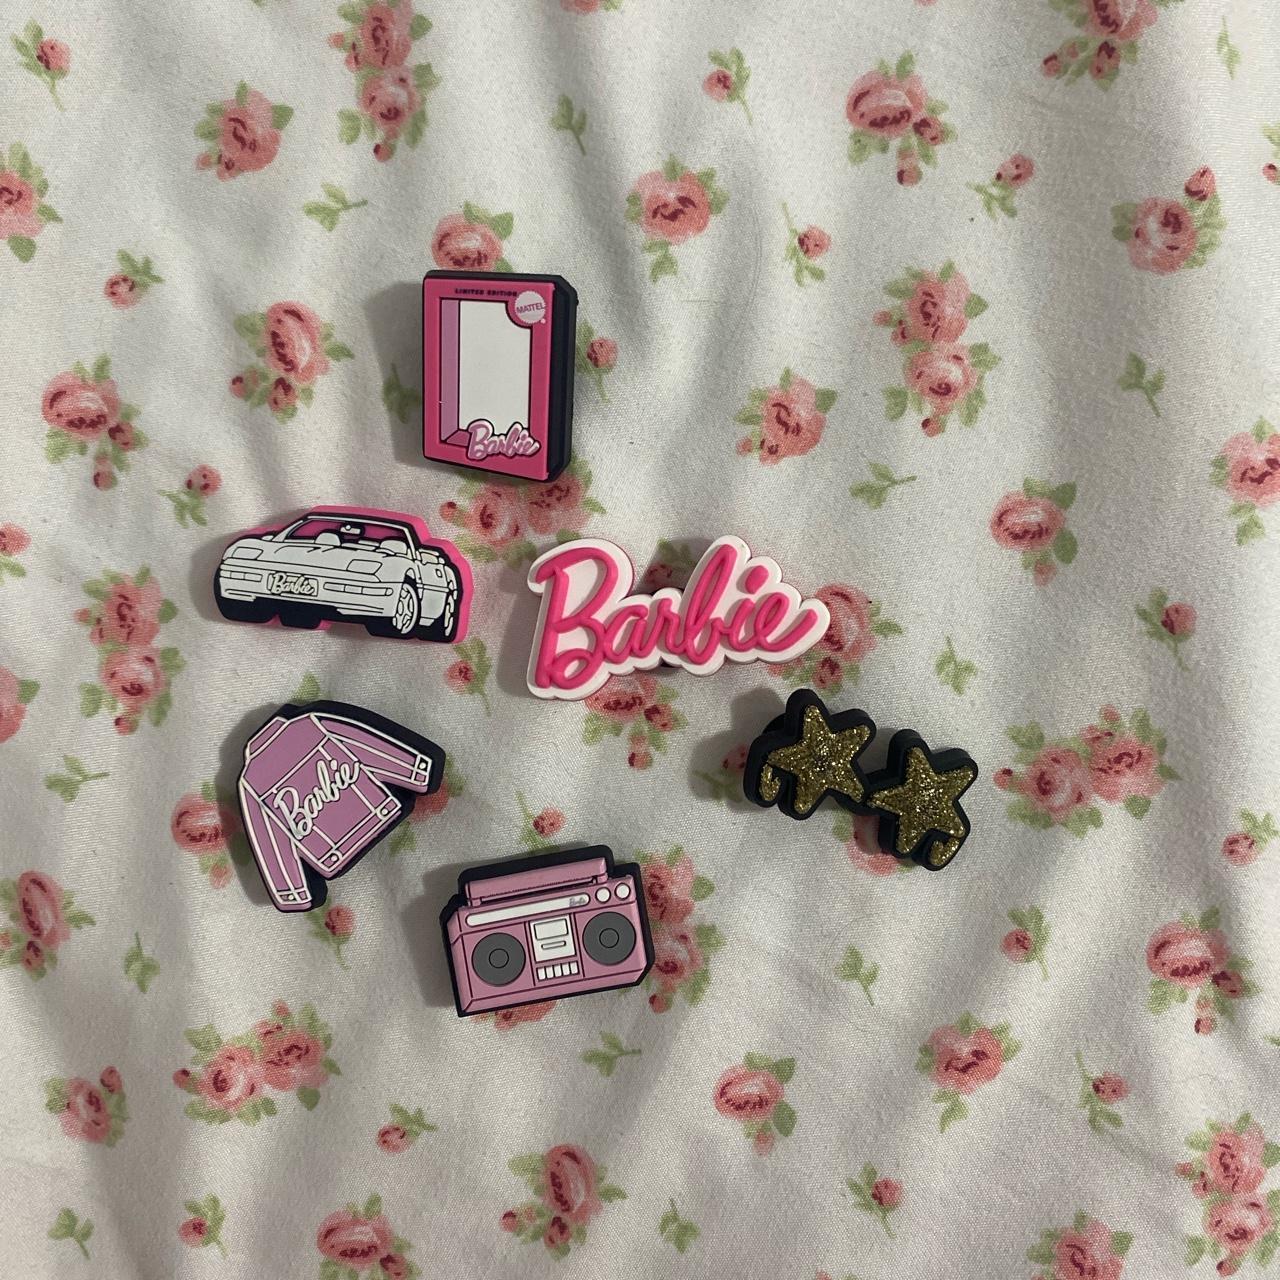 Barbie croc charms!, charms from the barbie and croc